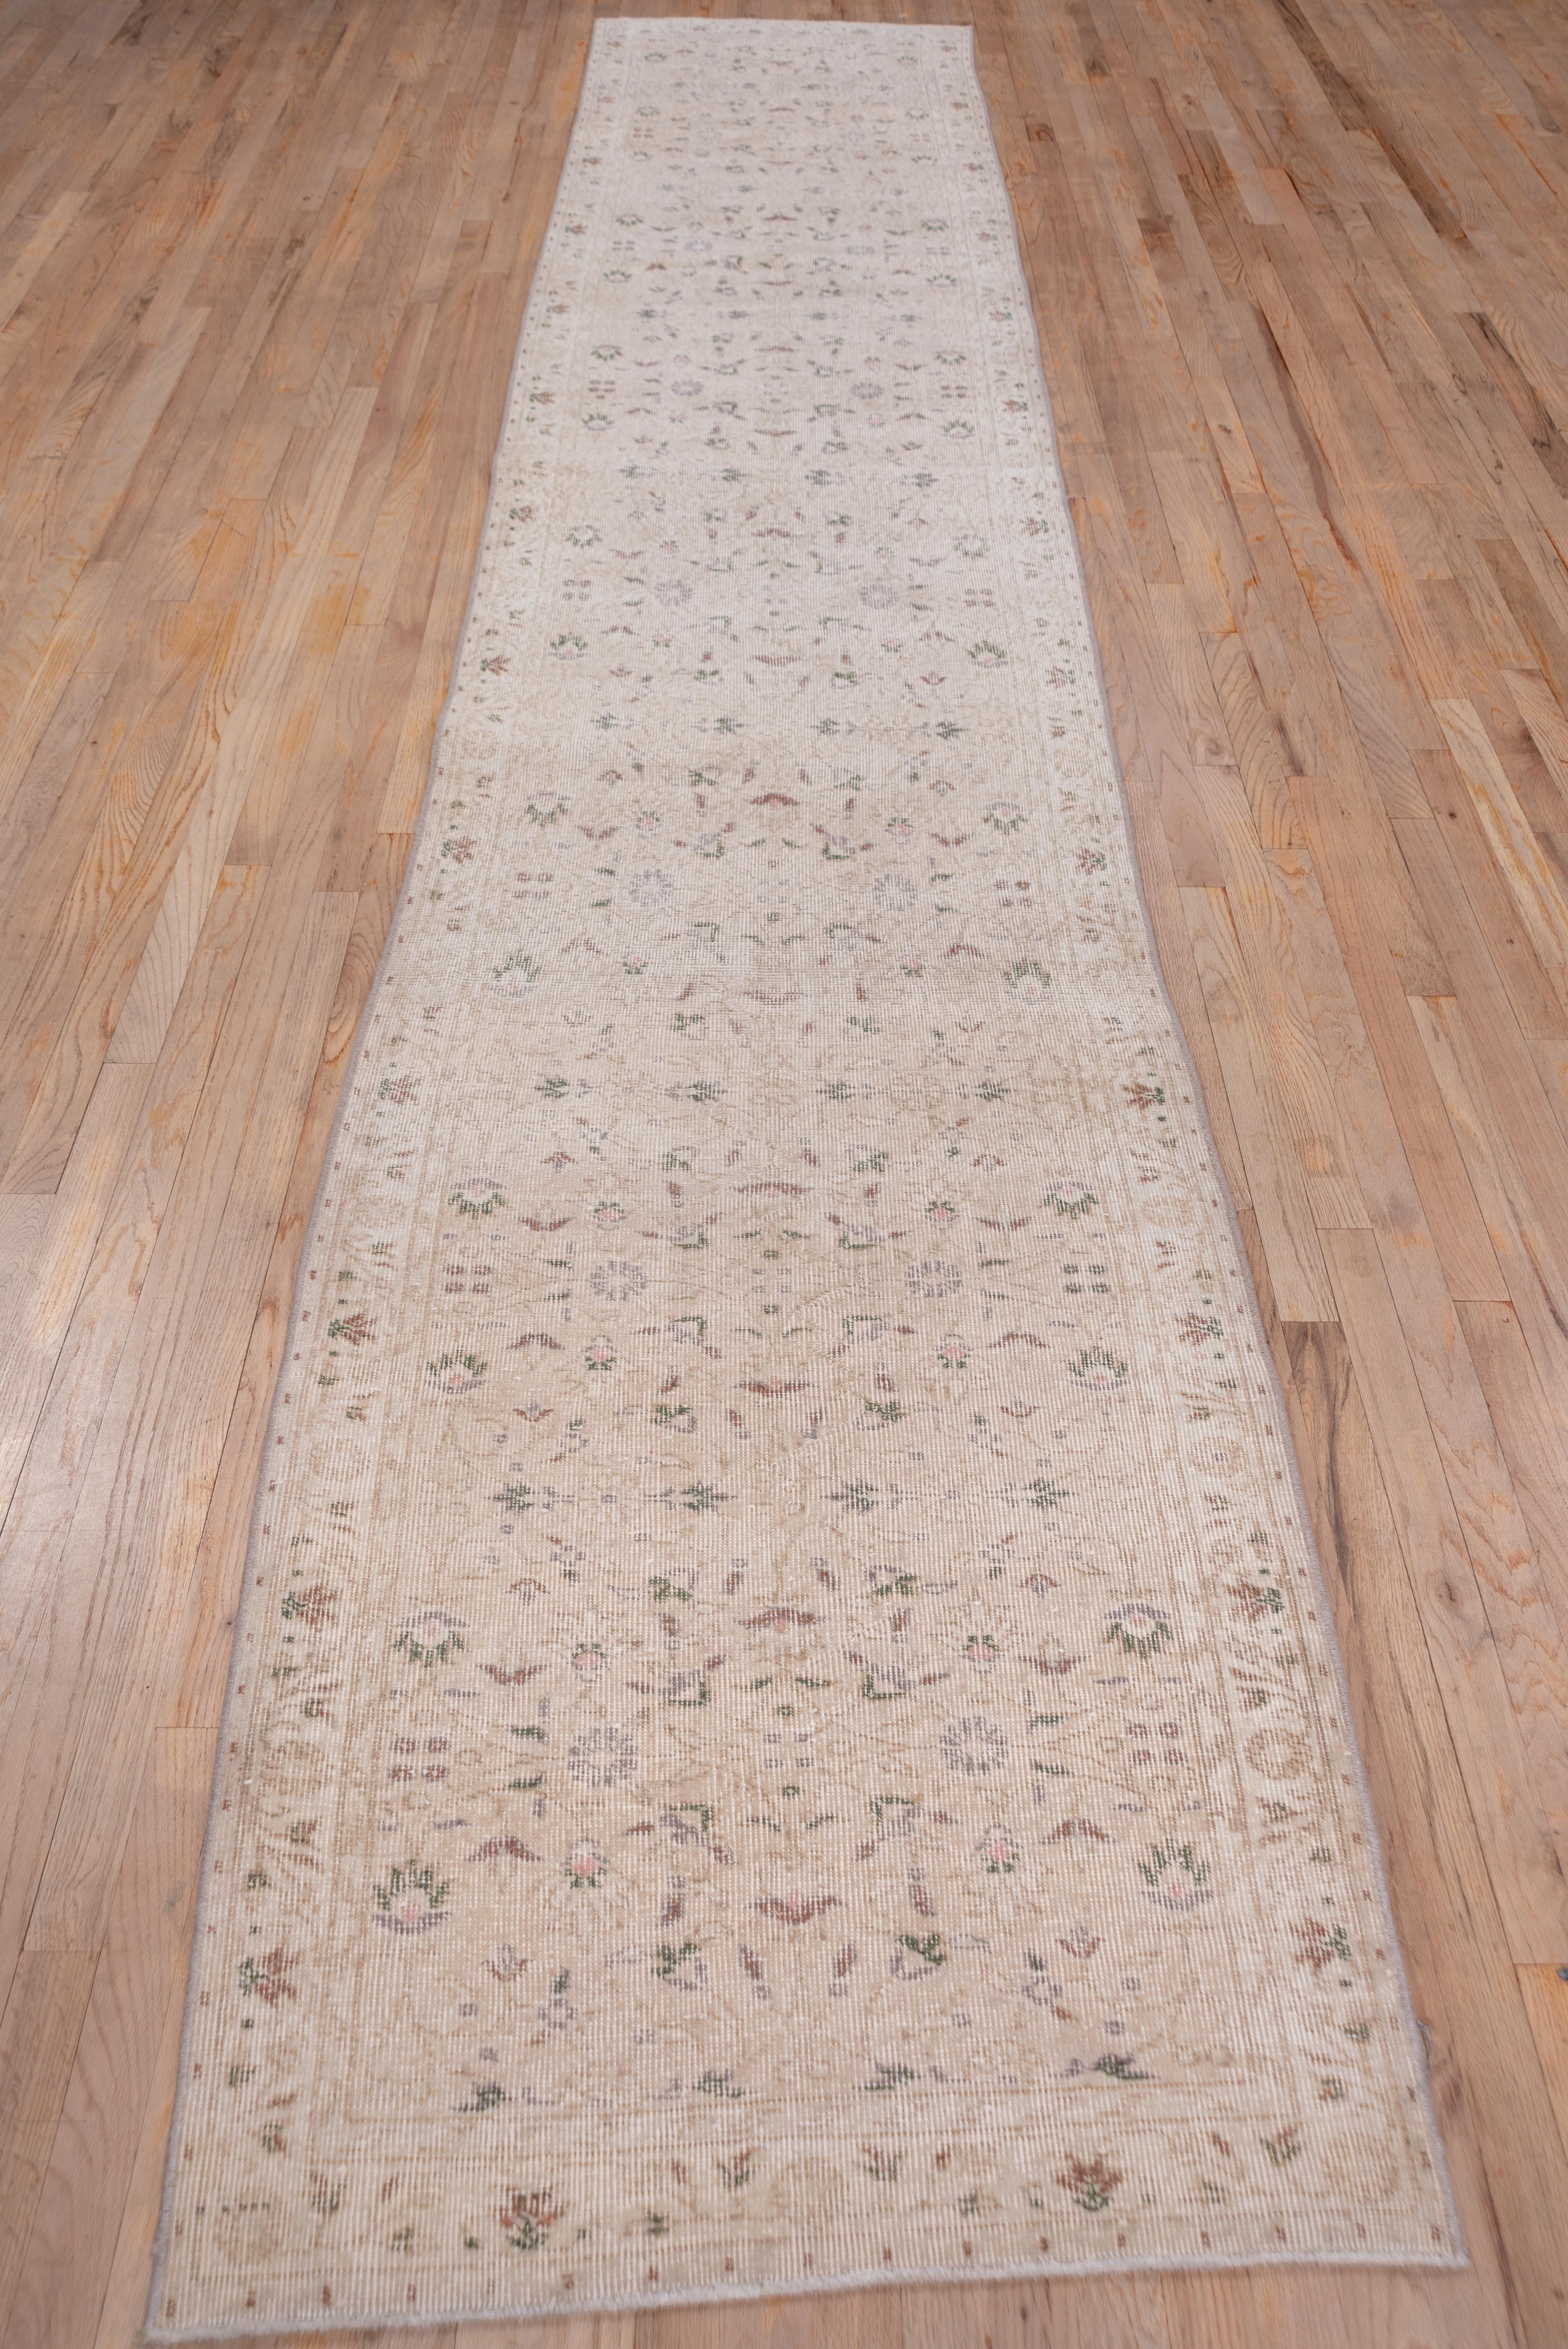 This solidly woven runner shows a sandy ecru field with arabesques and small rosettes and palmettes in an allover, repeating pattern. The tonally en suite border shows a budding tendril, rosettes and simple palmettes.